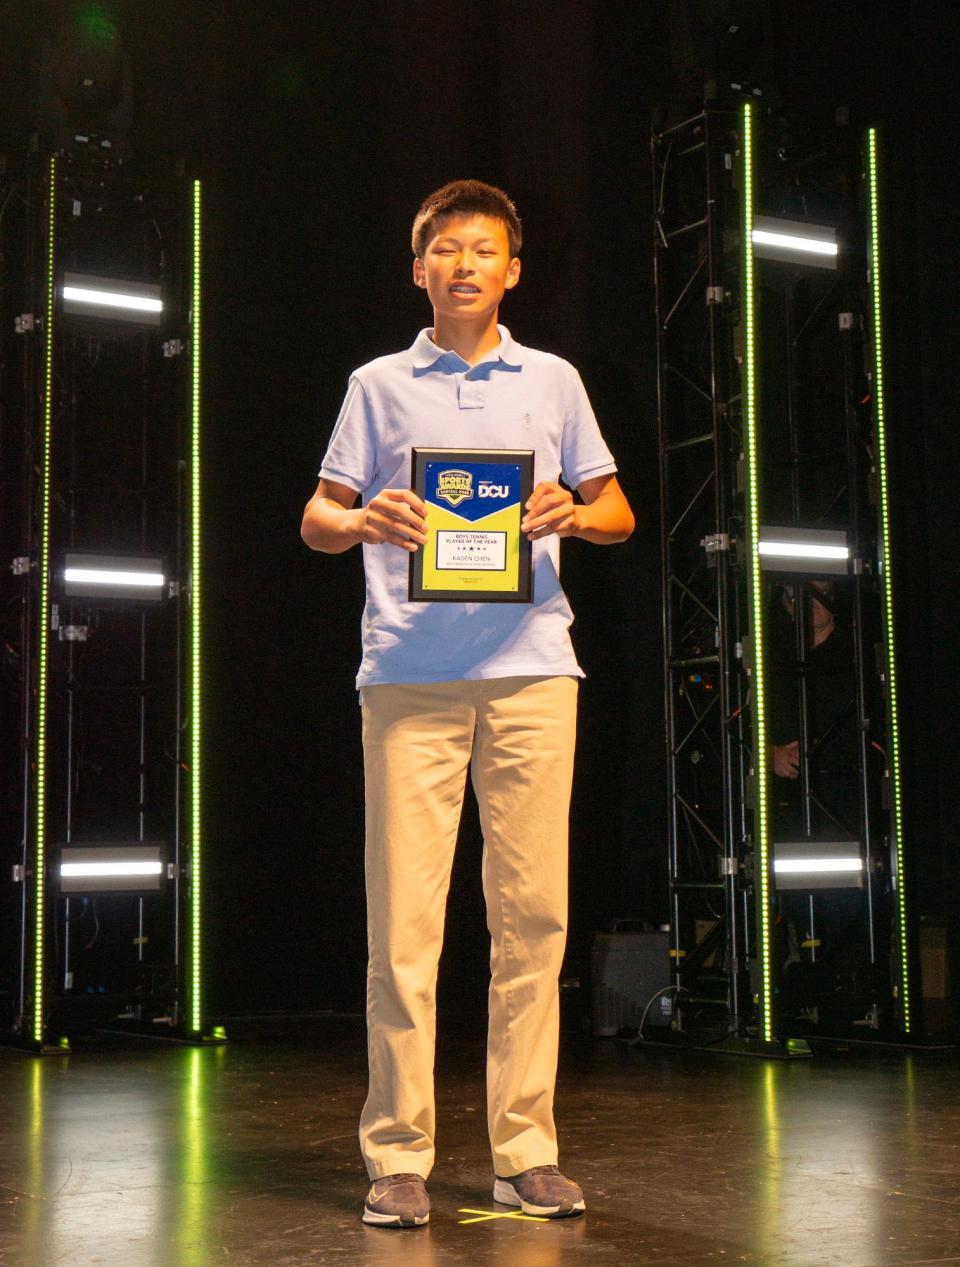 Westborough's Kaden Chen poses with his plaque after being named T&G Hometeam Boys' Tennis Player of the Year at Wednesday's Central Mass. High School Sports Awards at the Hanover Theatre.